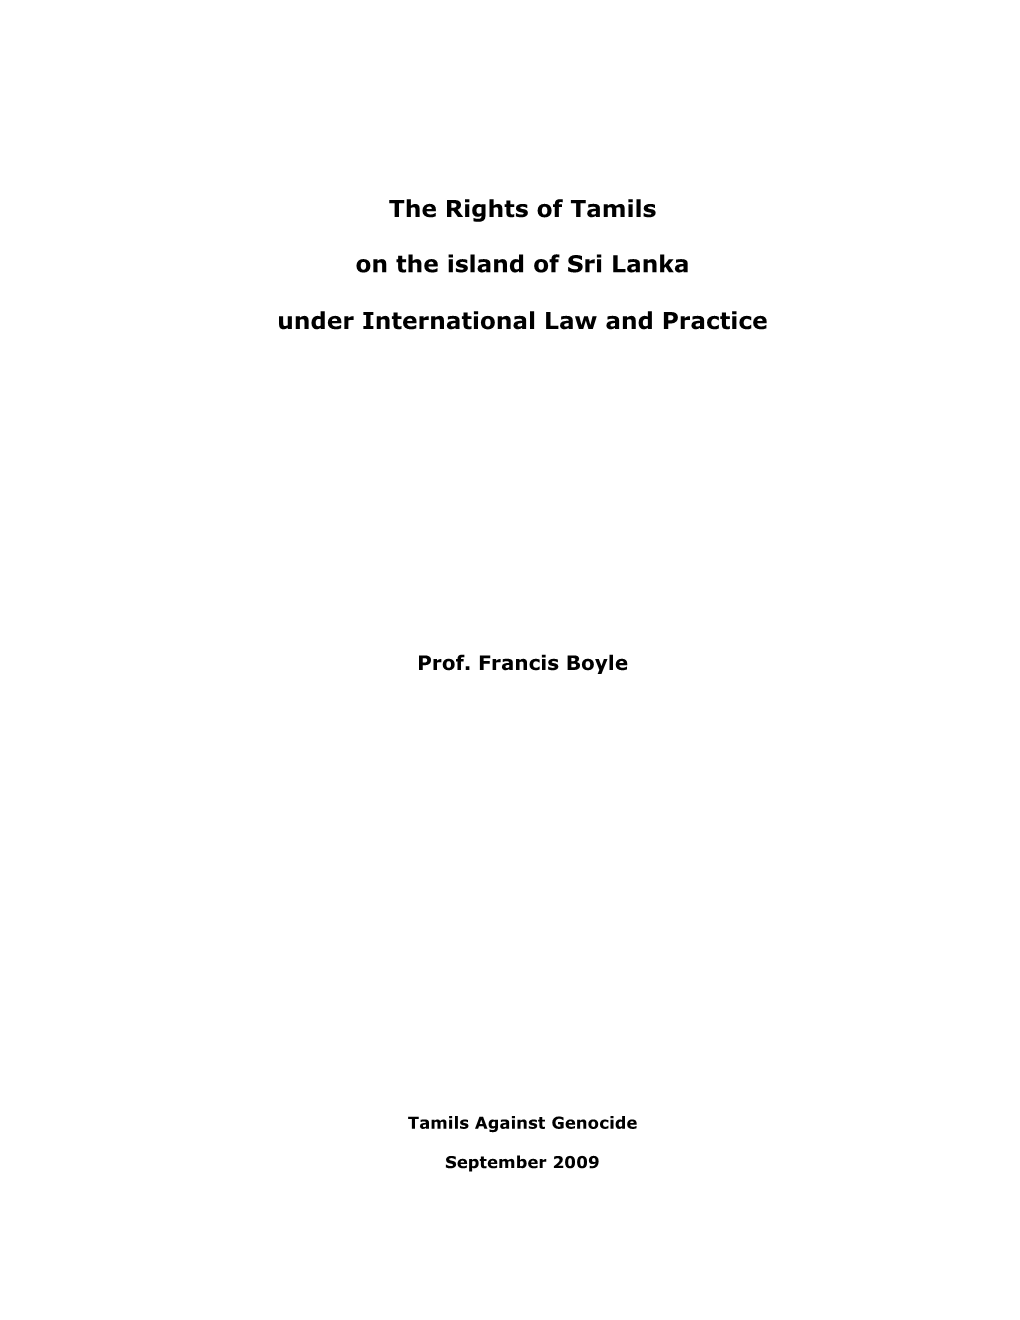 The Rights of Tamils on the Island of Sri Lanka Under